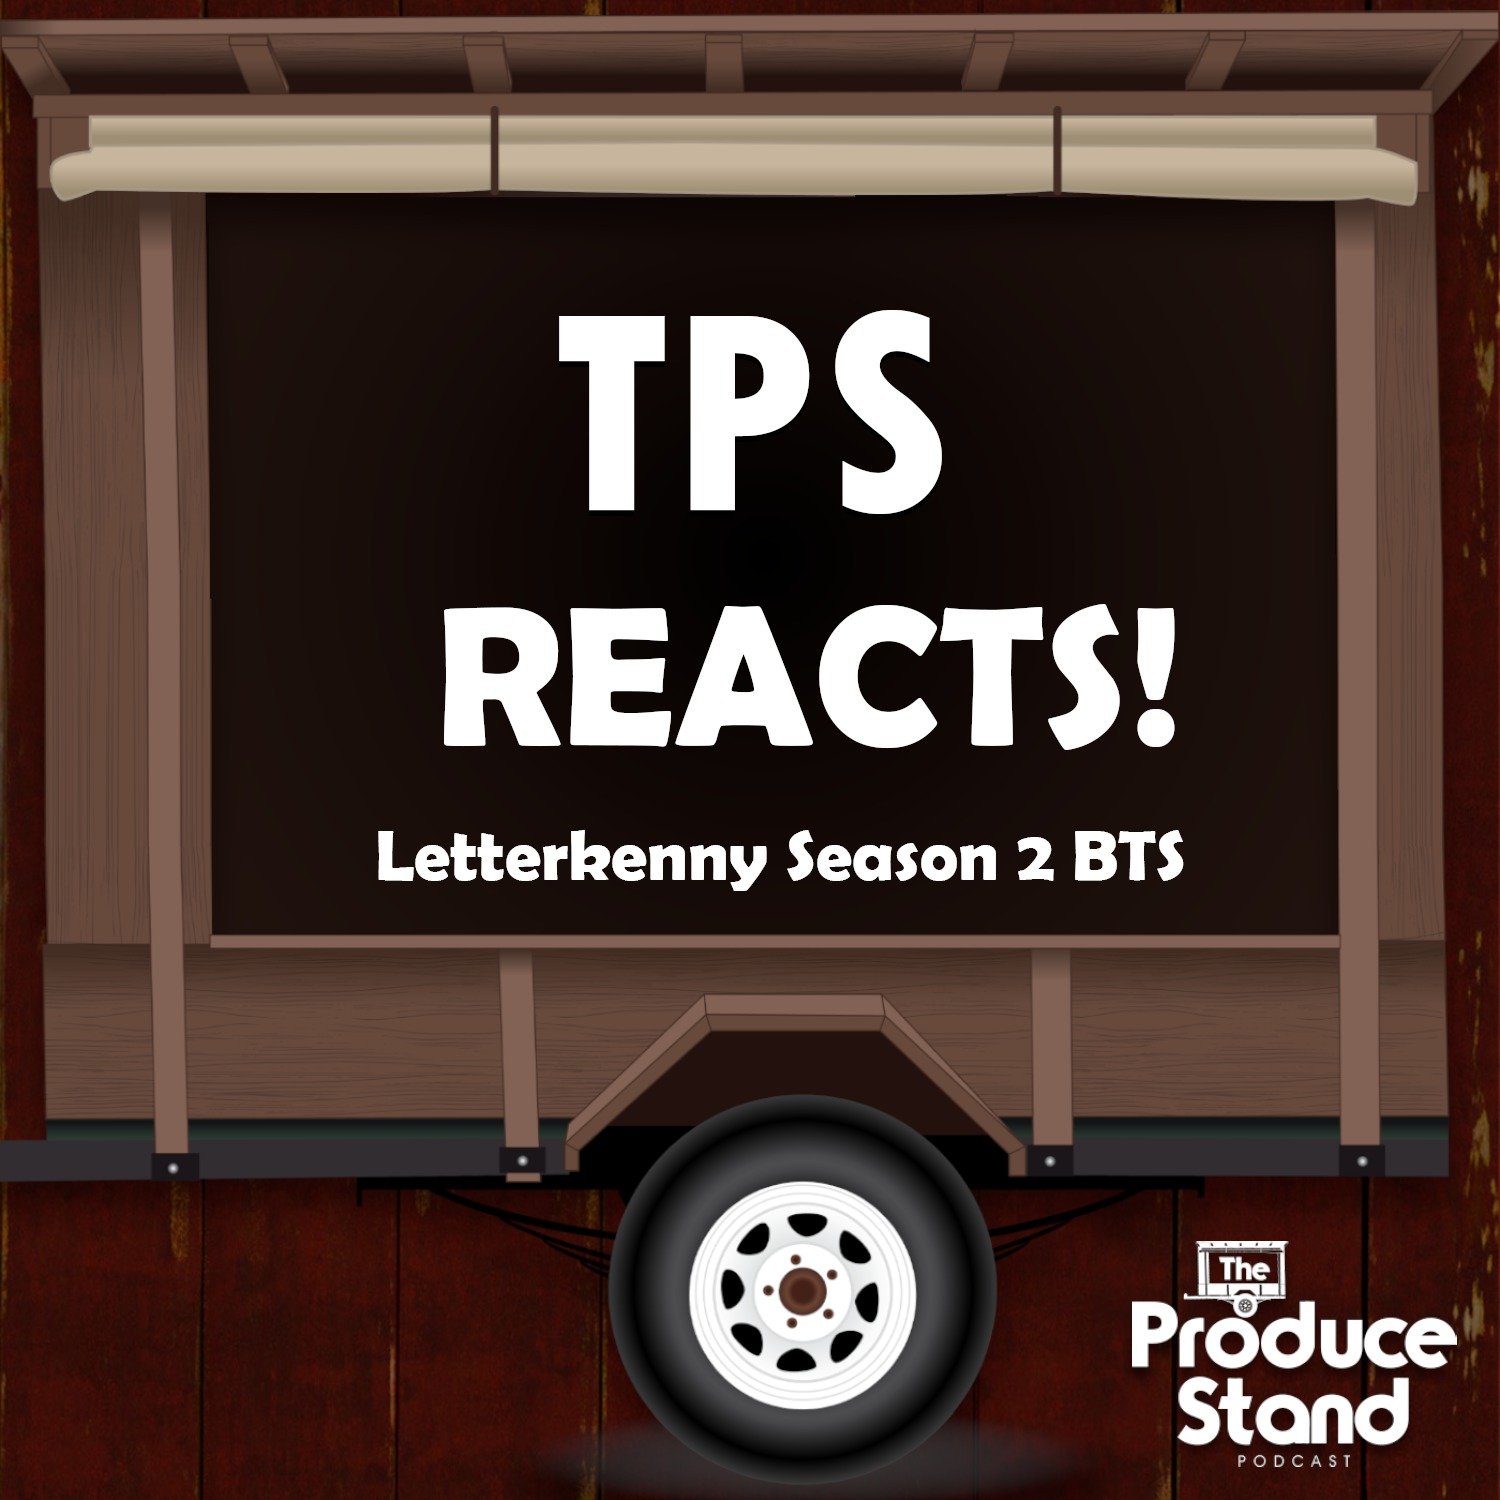 Episode cover art for TPS204: TPS REACTS! II